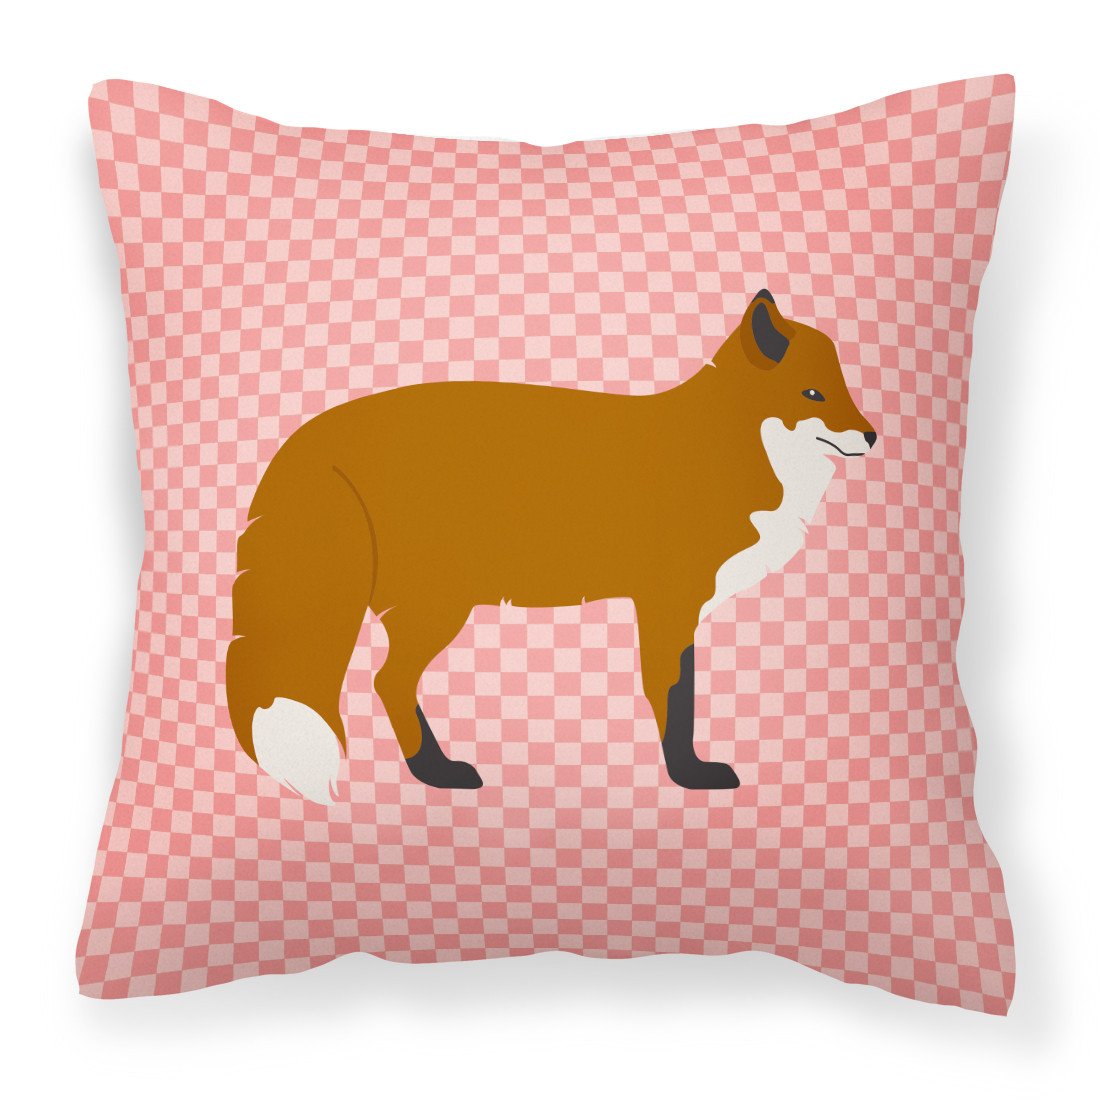 Red Fox Pink Check Fabric Decorative Pillow BB7876PW1818 by Caroline's Treasures